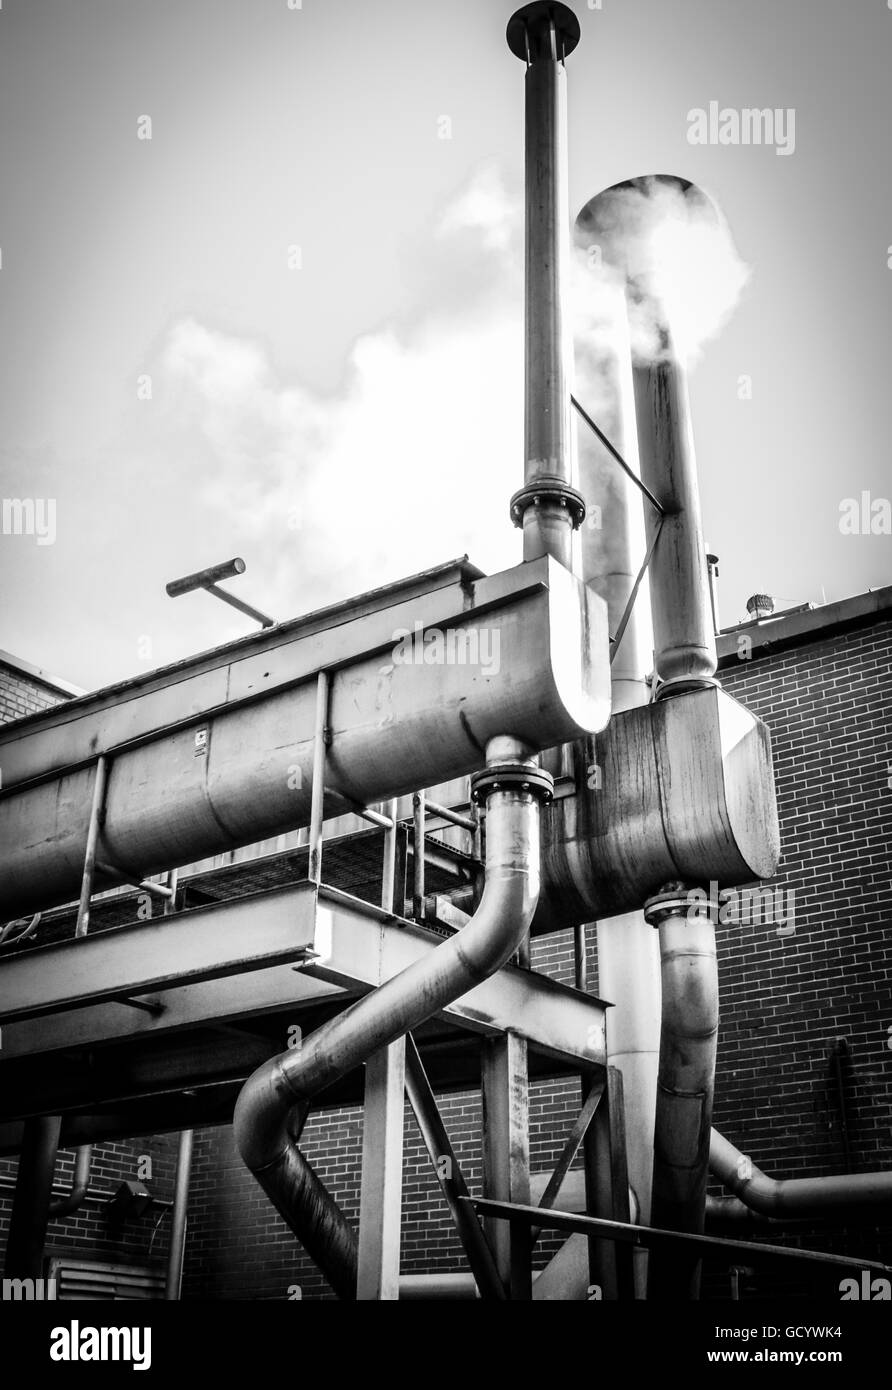 White steam rises around the processing facilities at the Jack Daniel's whiskey distillery site in Lynchburg, TN Stock Photo